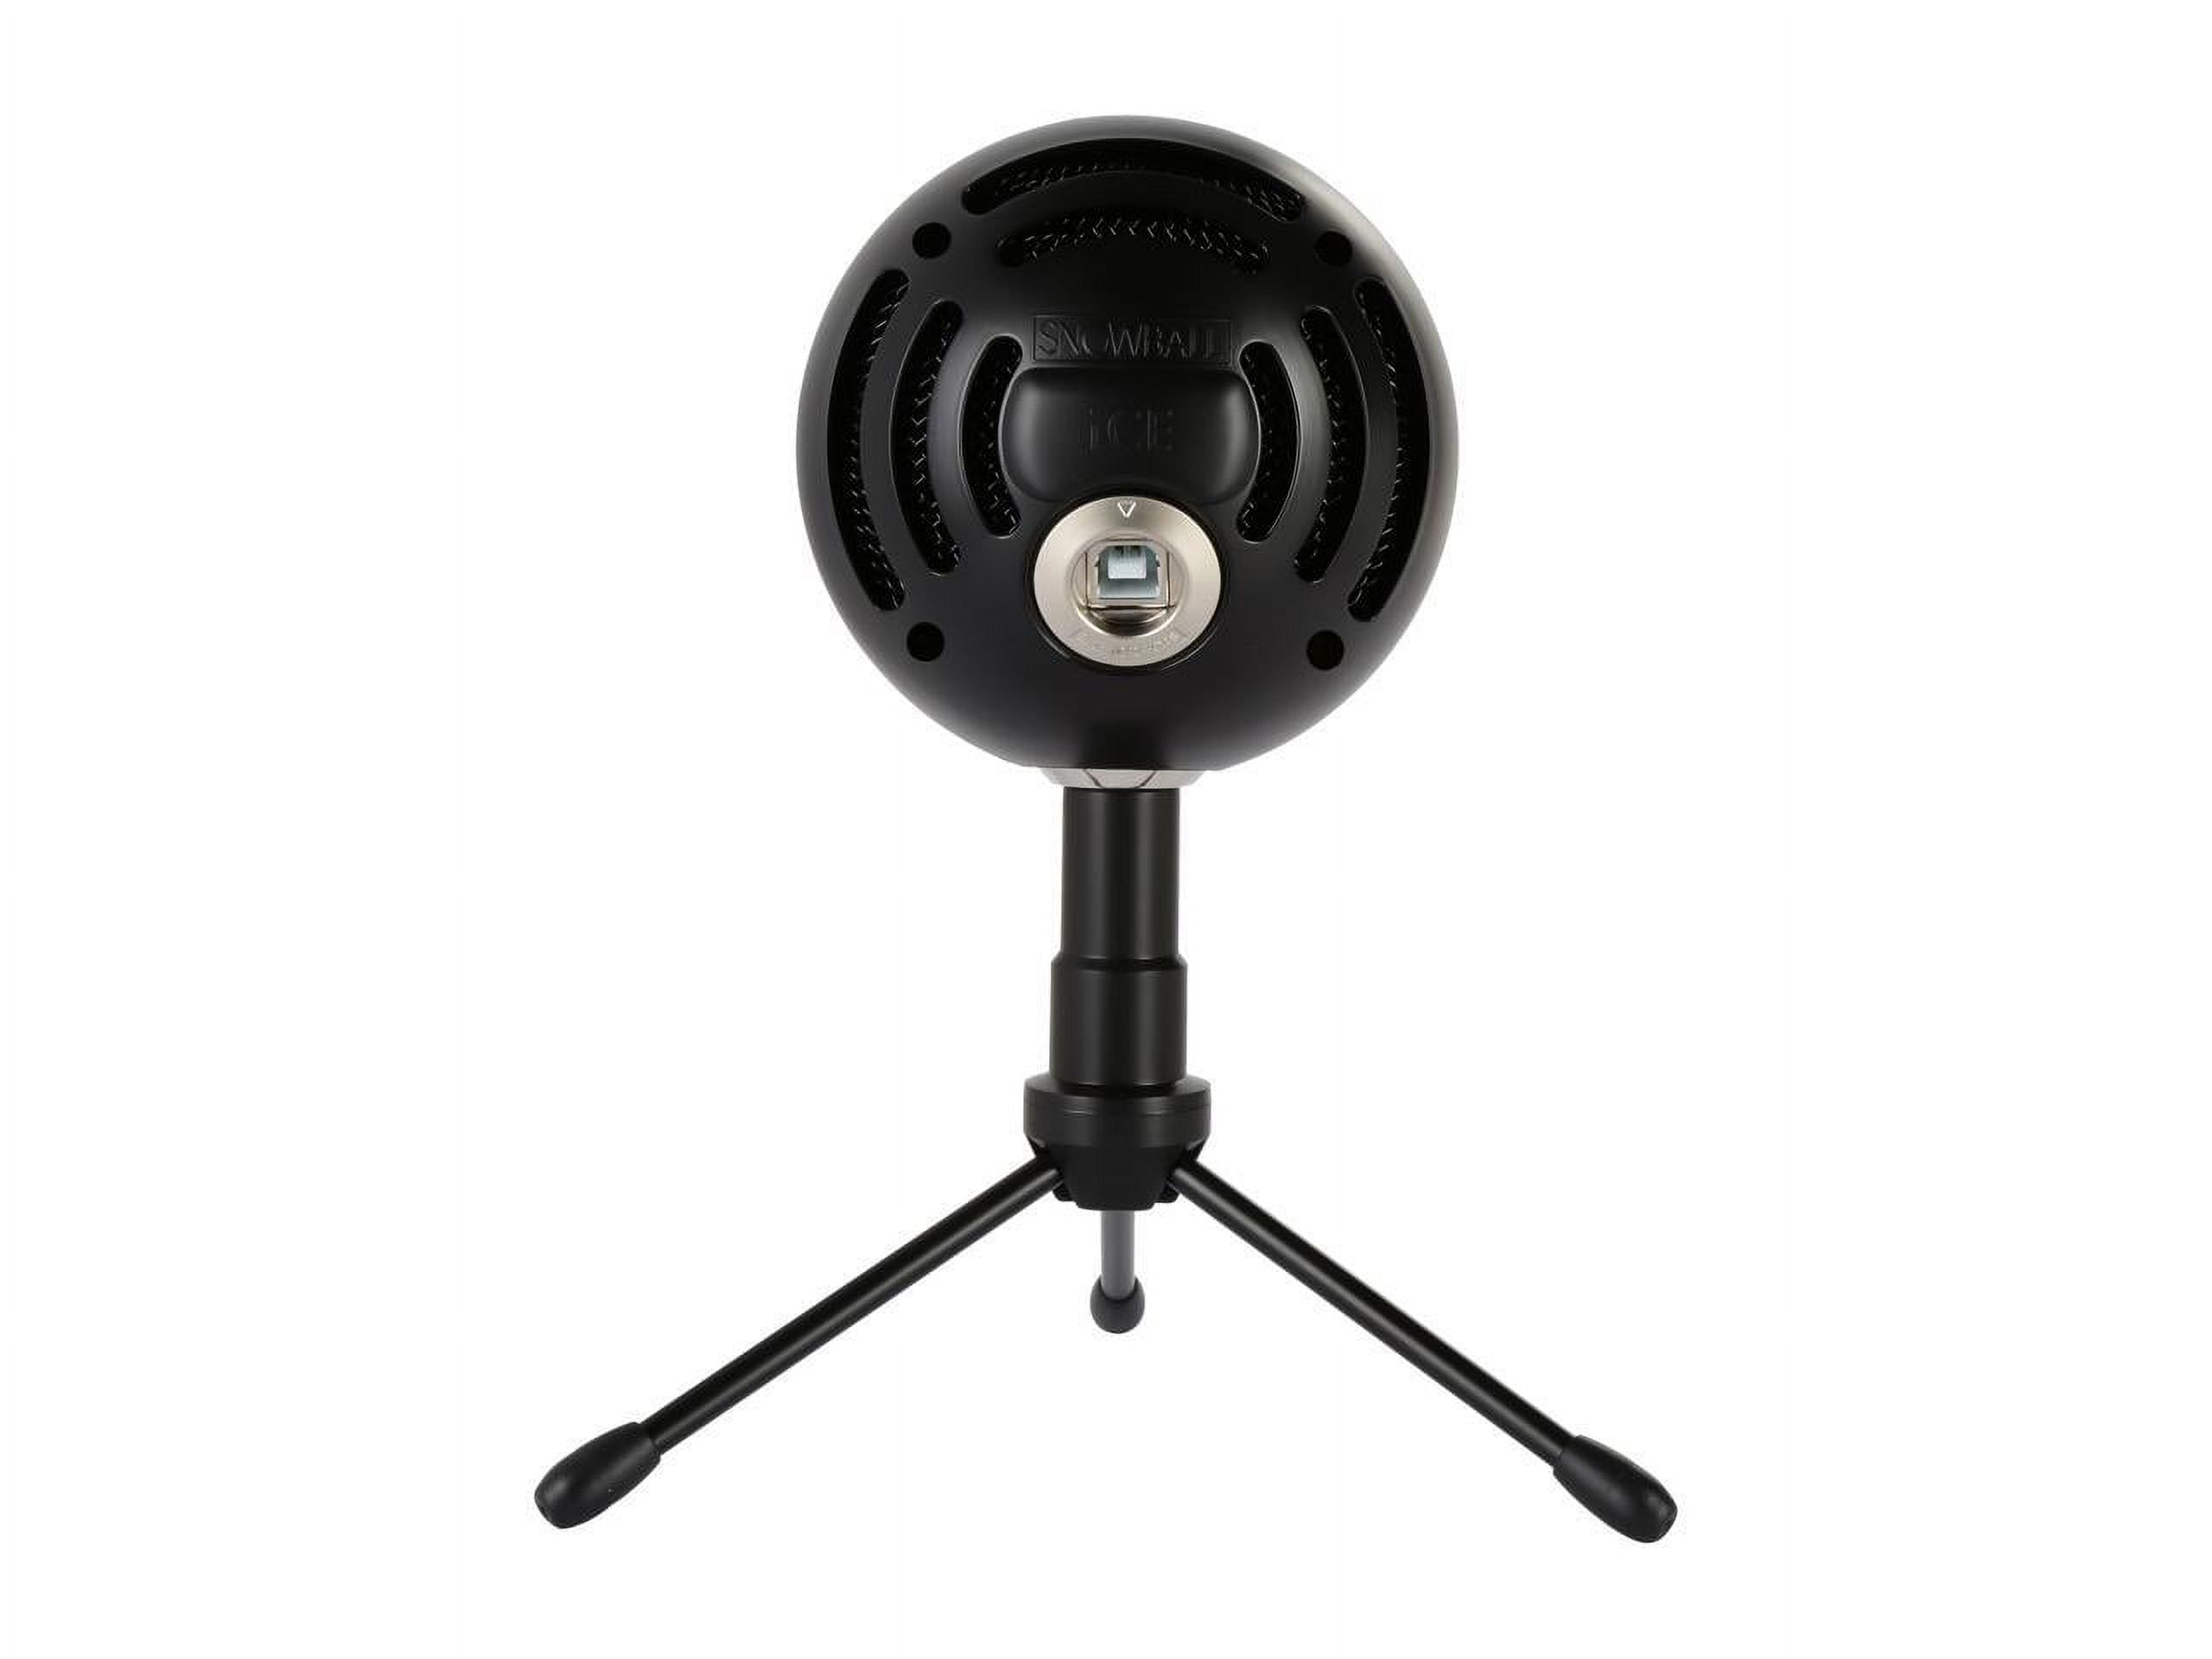 Blue Snowball iCE USB Microphone for PC, Mac, Gaming, Recording, Streaming, Podcasting, with Cardioid Condenser Mic Capsule, Adjustable Desktop Stand and USB cable, Plug 'n Play – Black - image 4 of 6